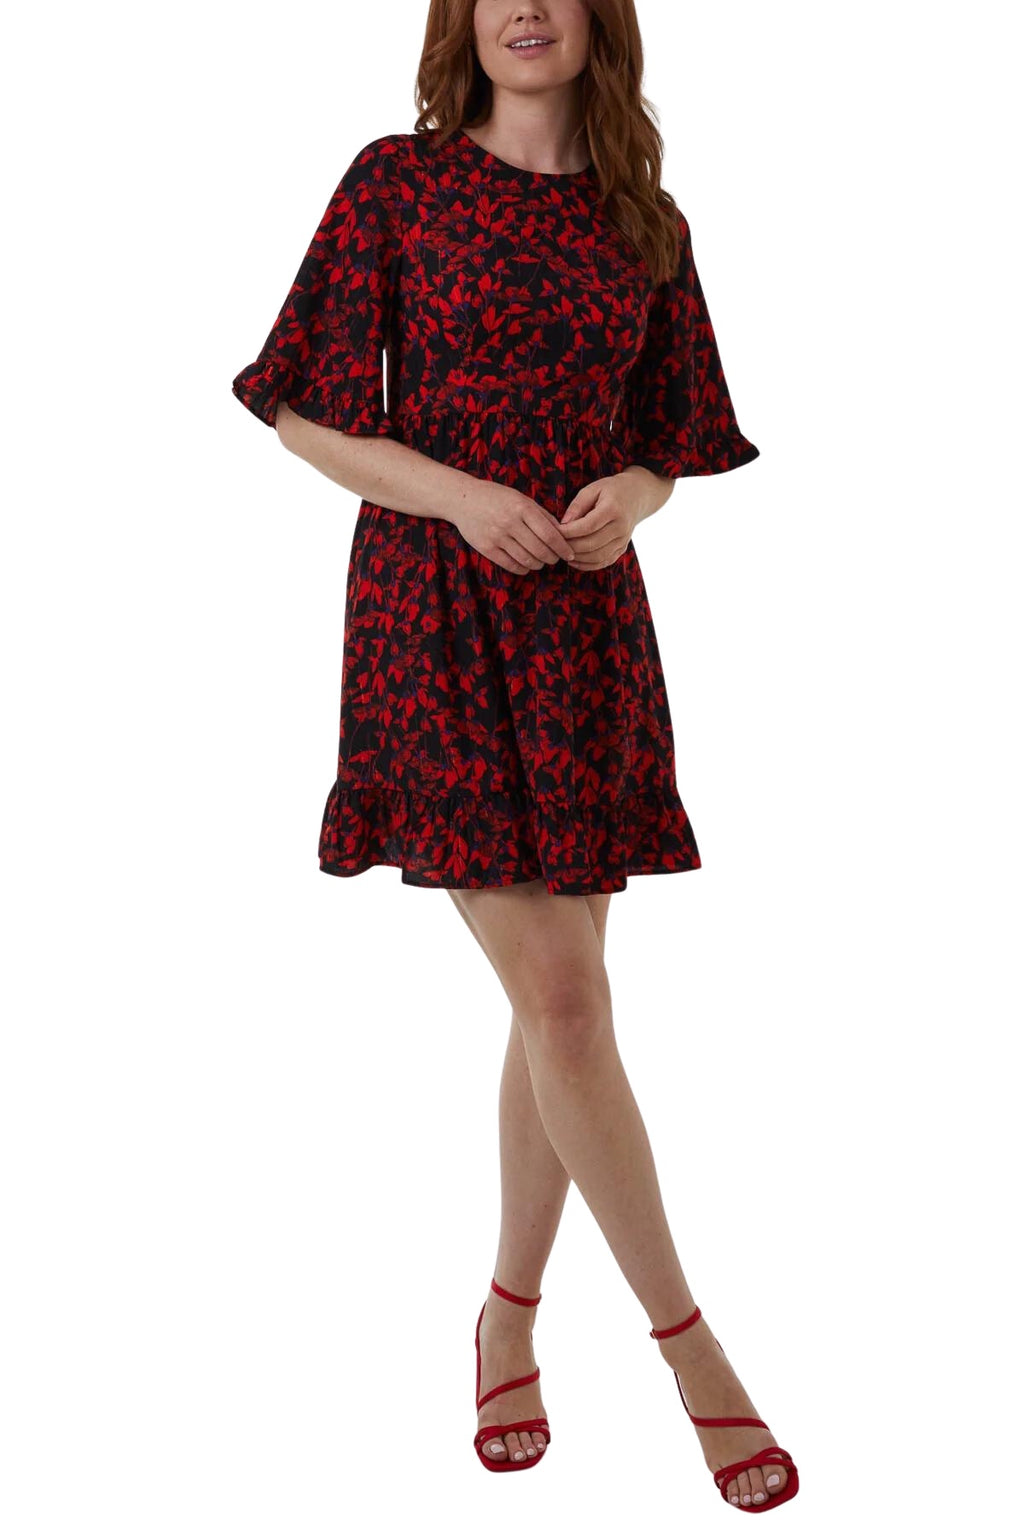 Red Floral Print Swing Dress